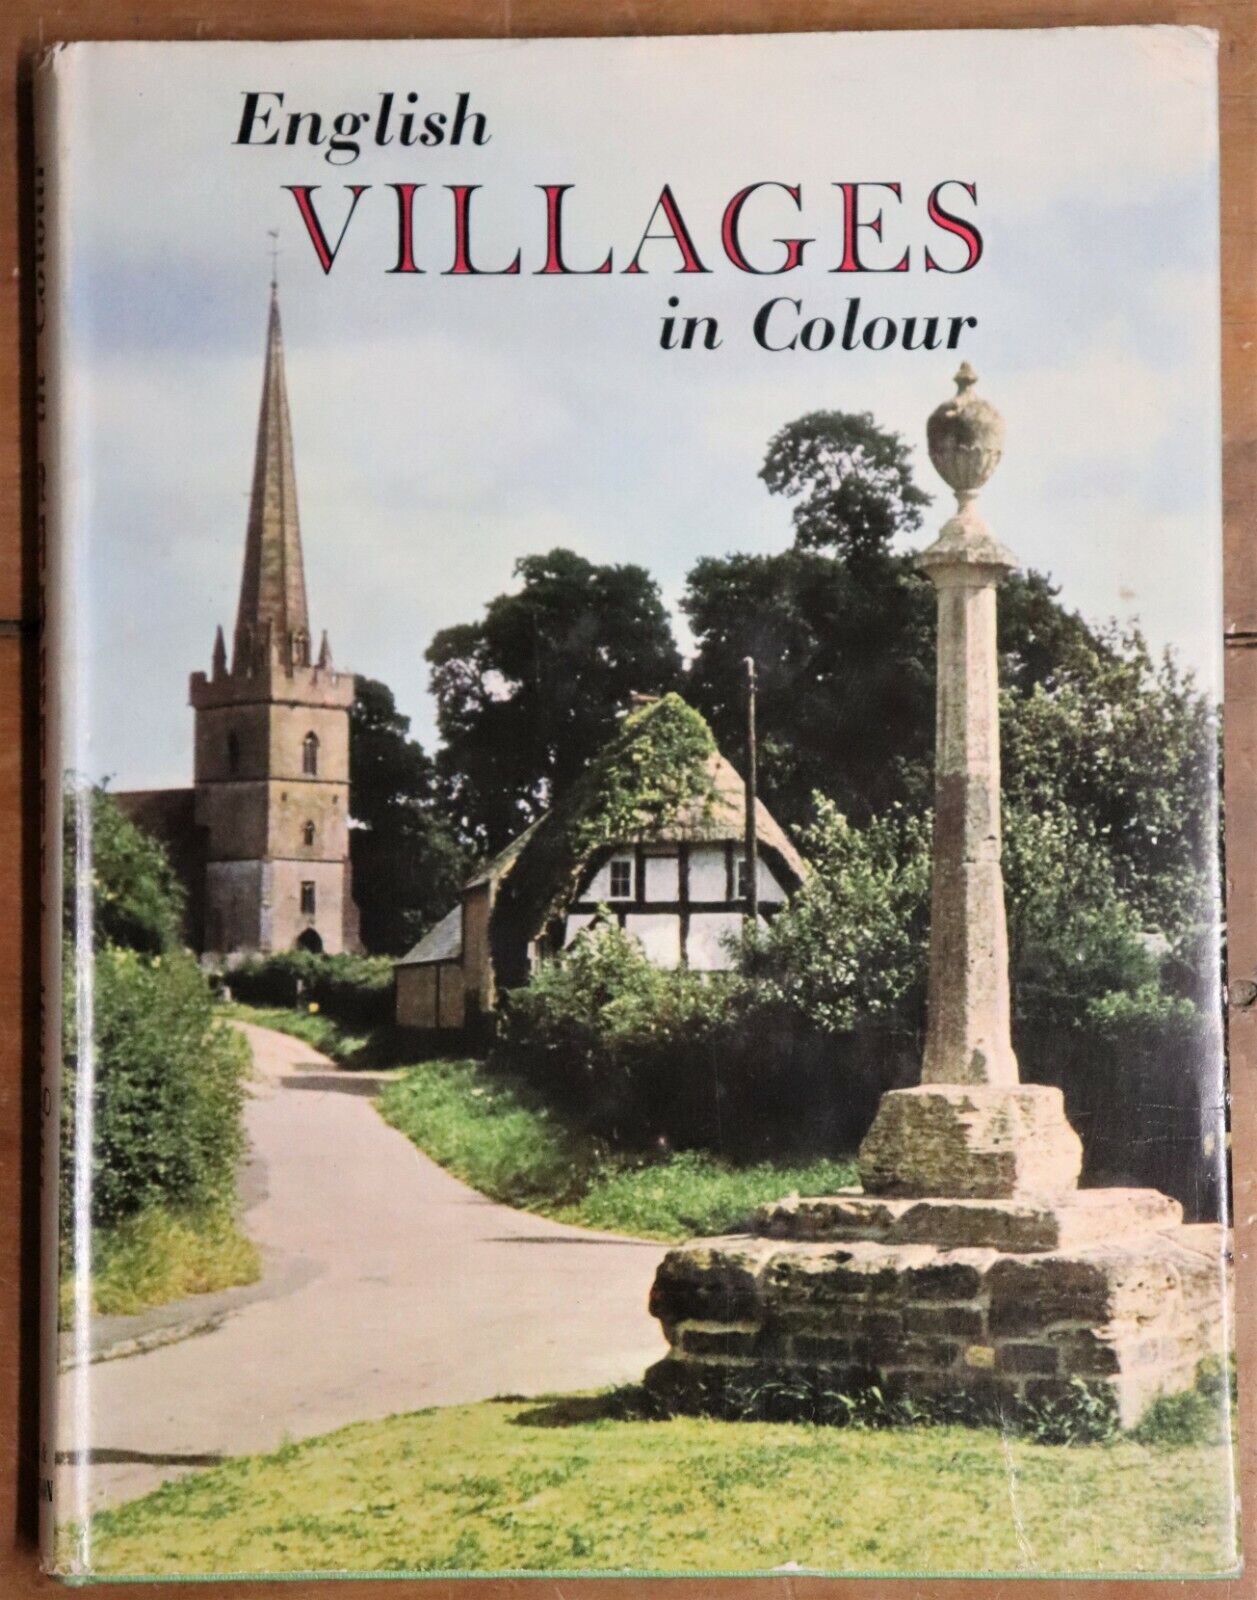 English Villages in Colour - 1958 - 1st Edition